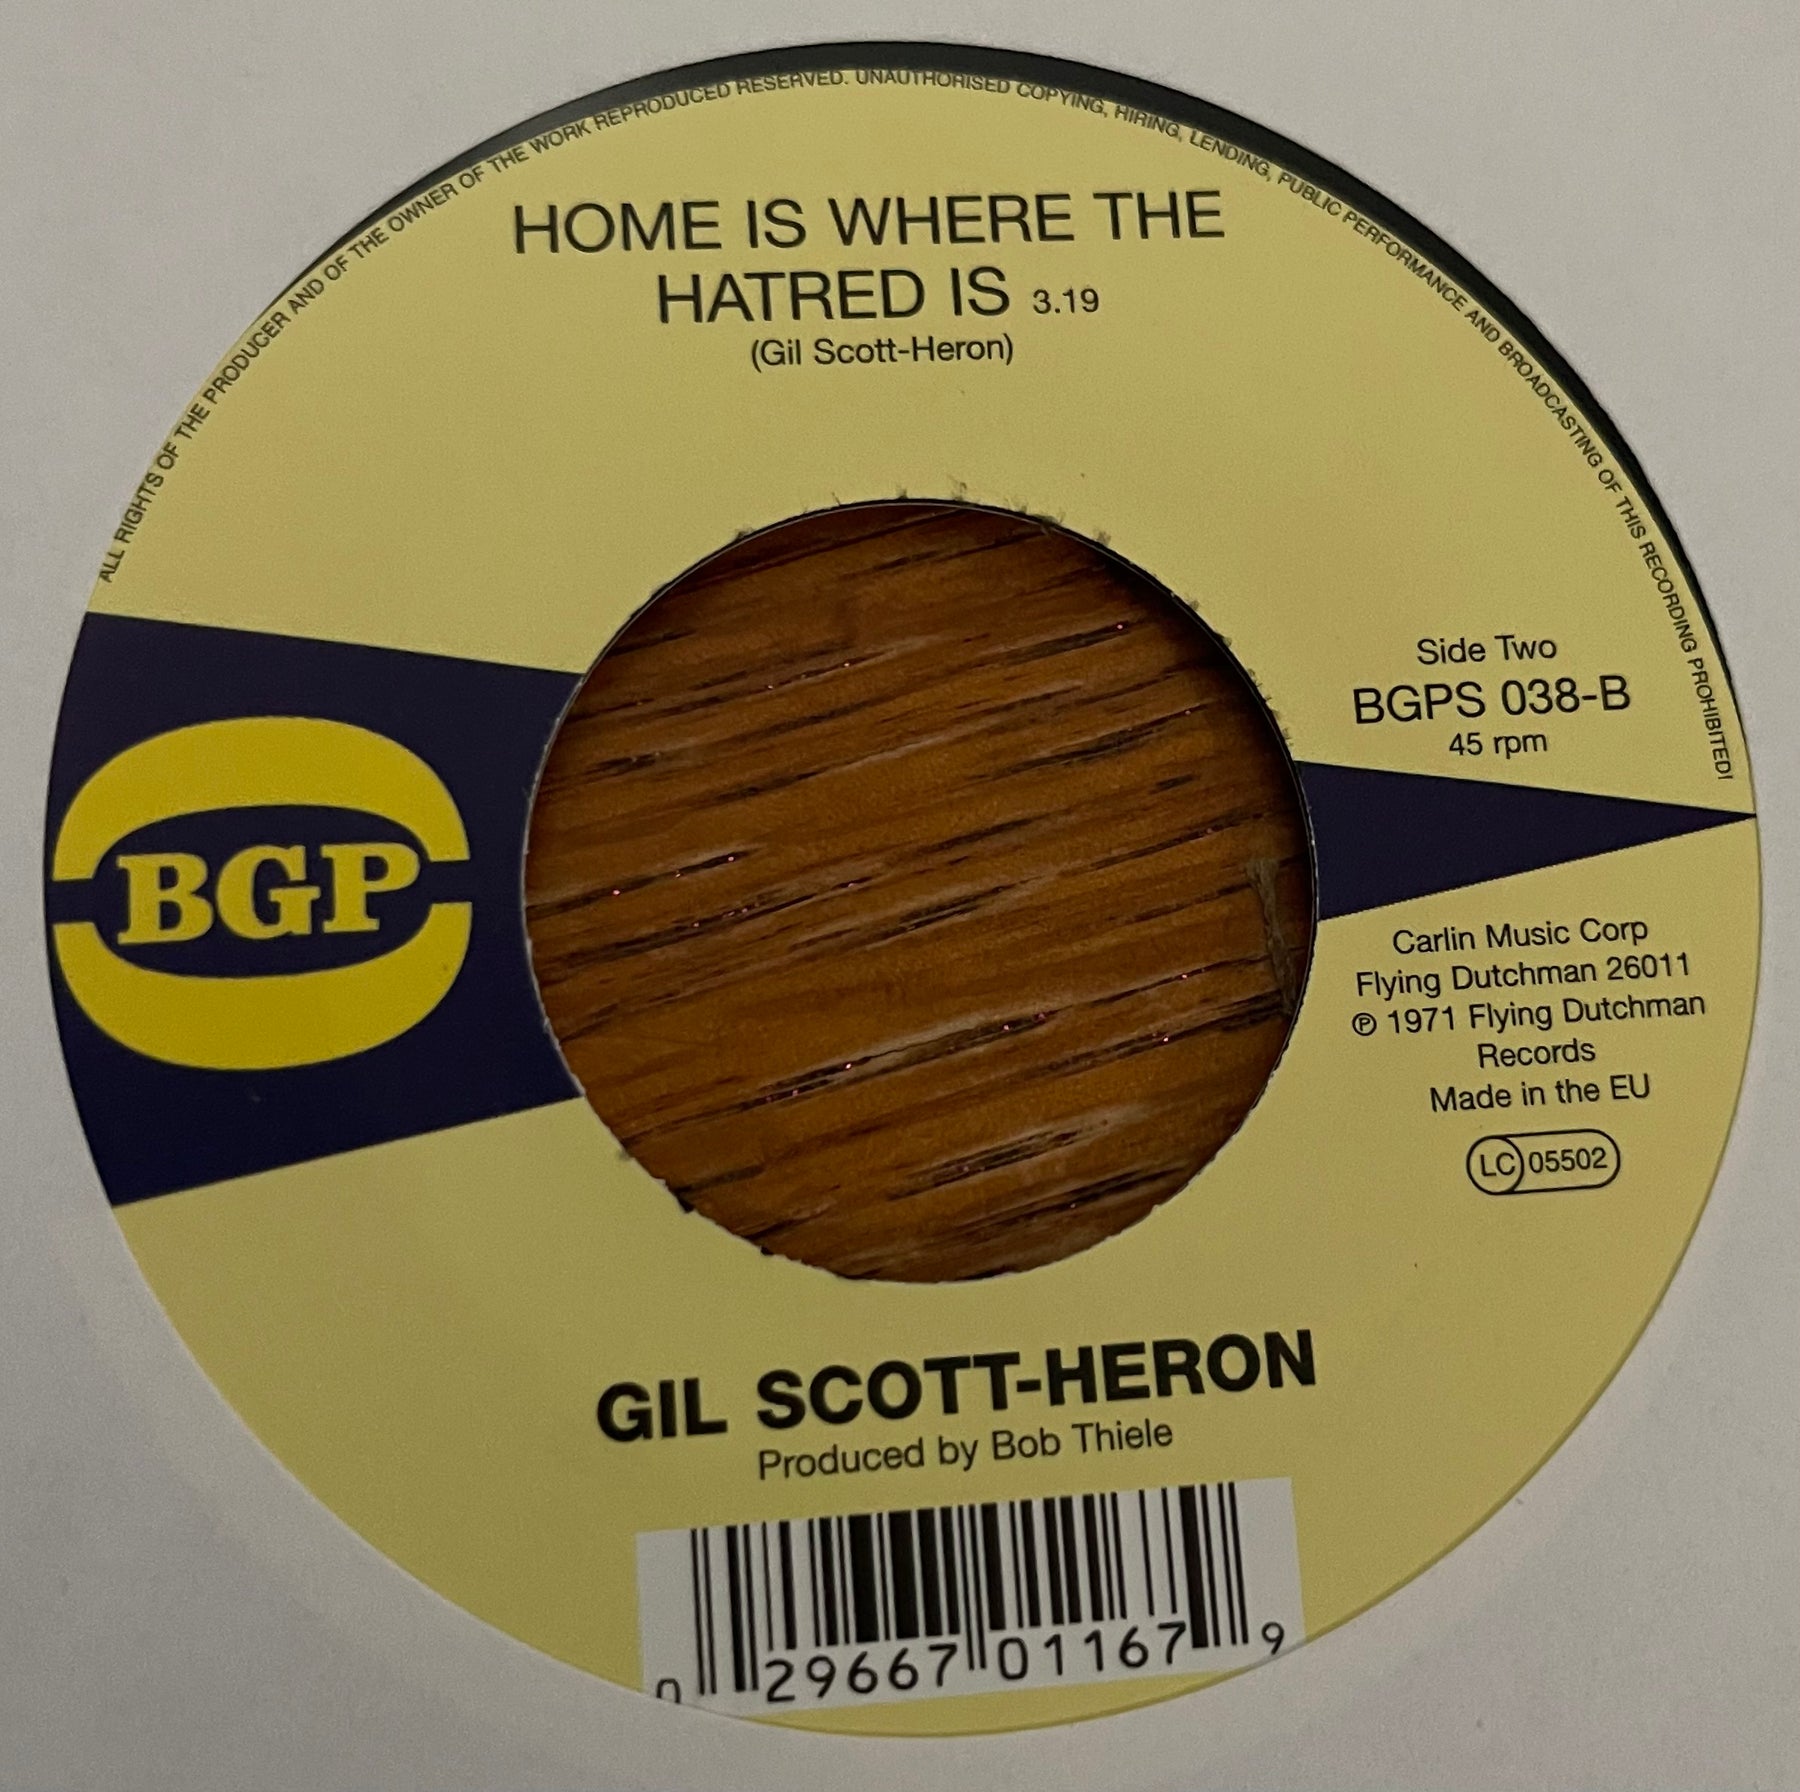 Gil Scott-Heron - The Revolution Will Not Be Televised b/w Home Is Where the Hatred Is